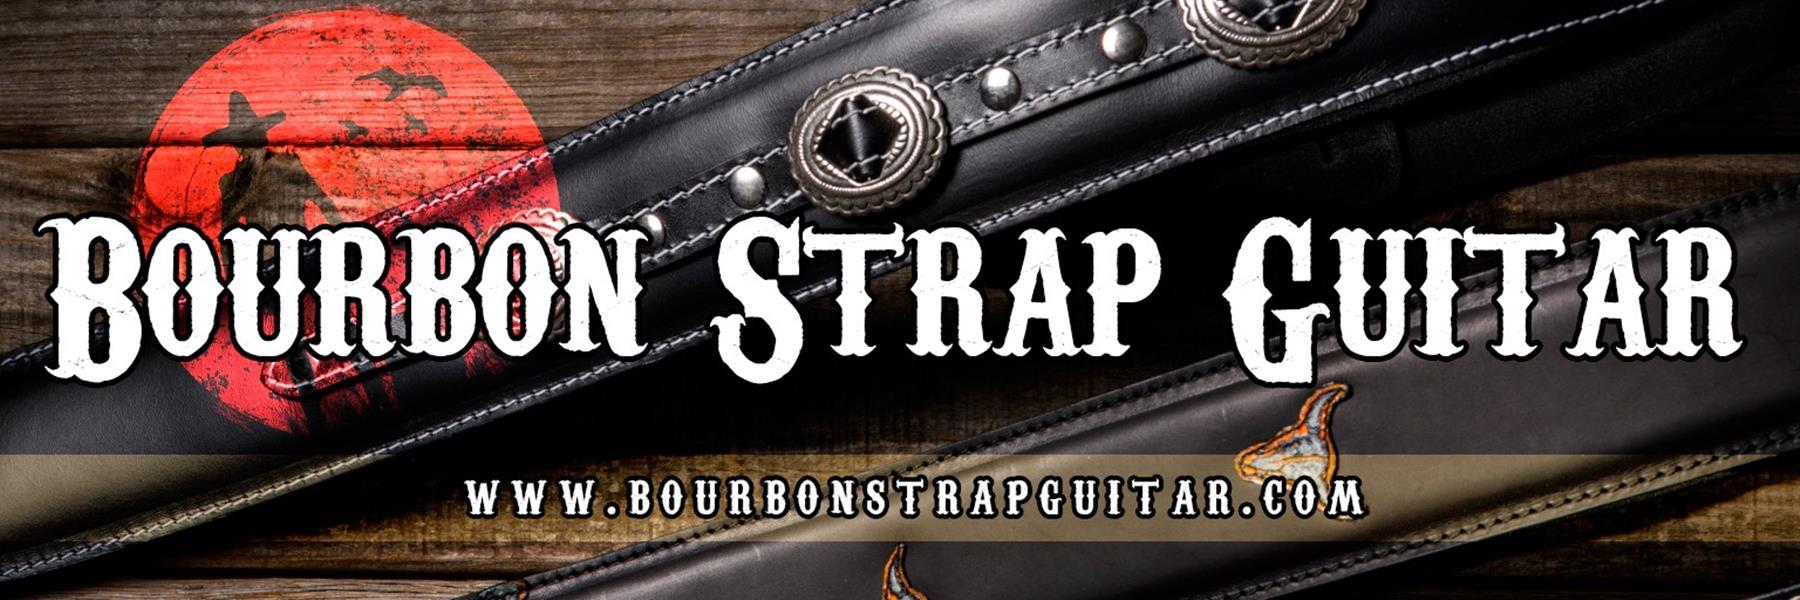 Bourbon Strap Guitar, the strap made in Spain 🇪🇸